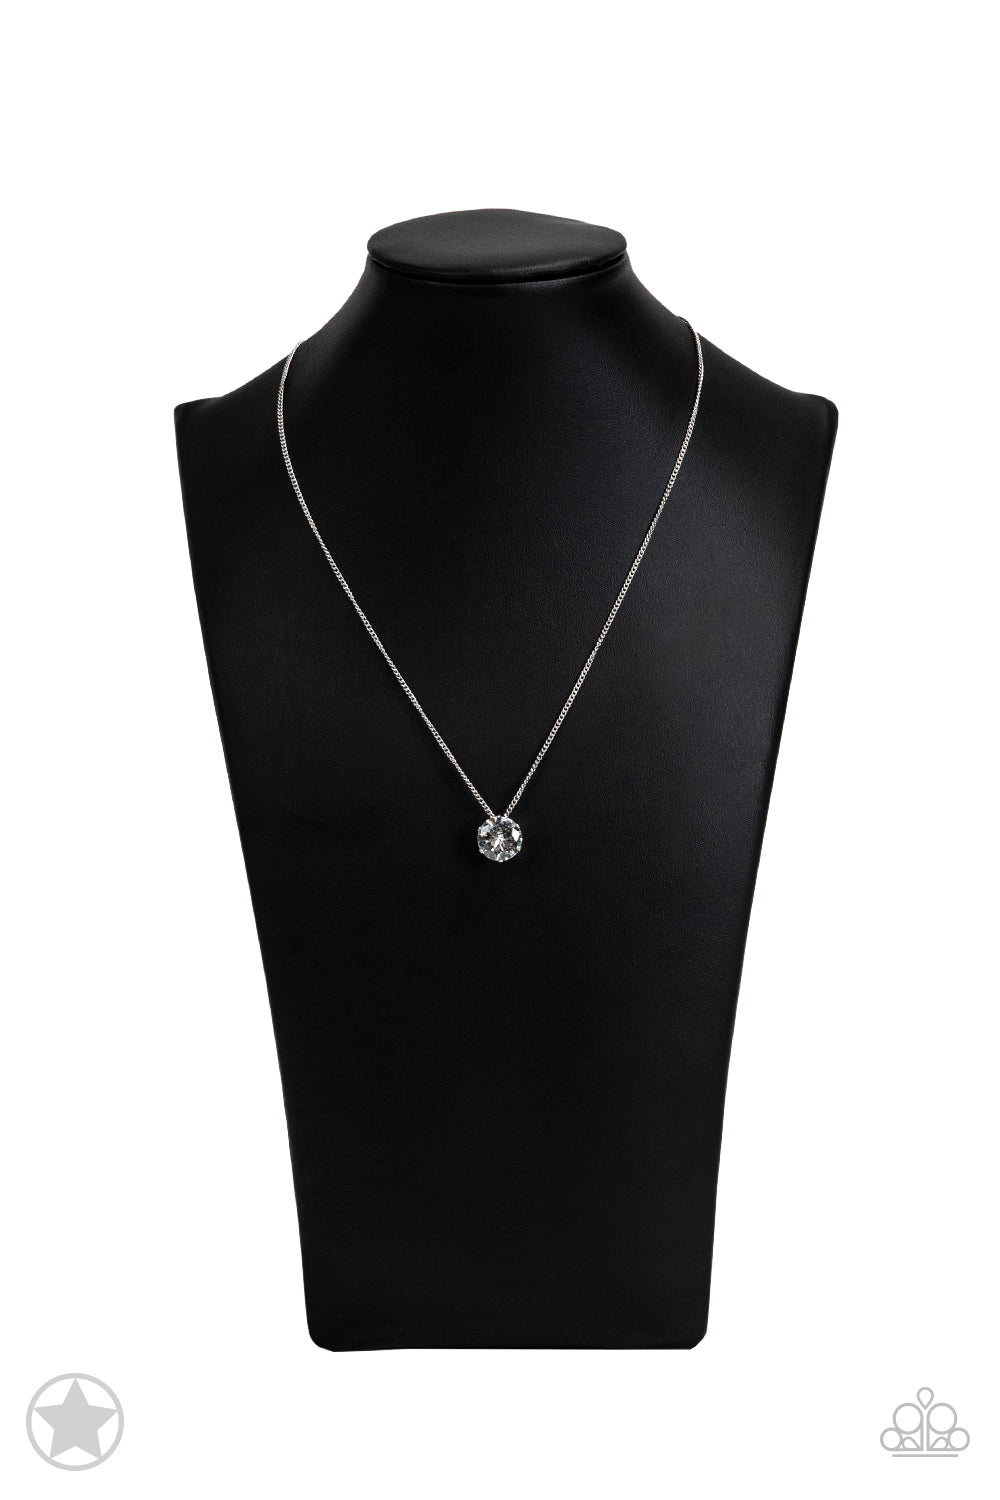 Paparazzi Accessories What A Gem - White A single rhinestone sparkles brilliantly at the bottom of a dainty silver chain, creating a stunning solitaire design. Features an adjustable clasp closure. Sold as one individual necklace. Includes one pair of mat